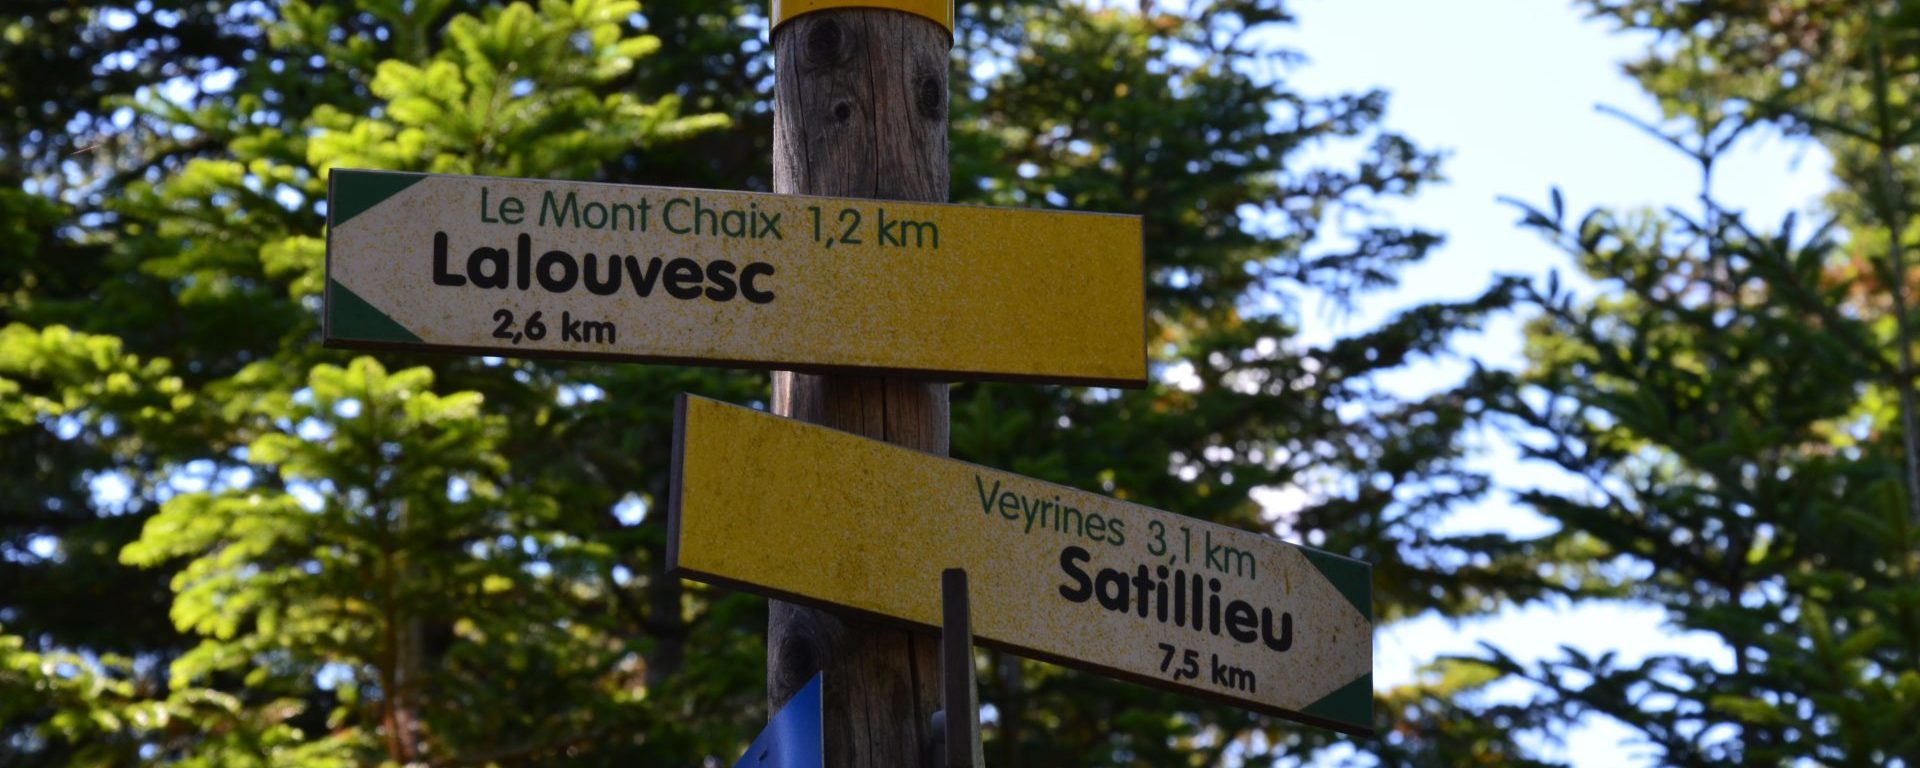 hiking trail in Ardèche and Saint Régis pilgrimage between Le Puy en Velay and the Basilica of Lalouvesc